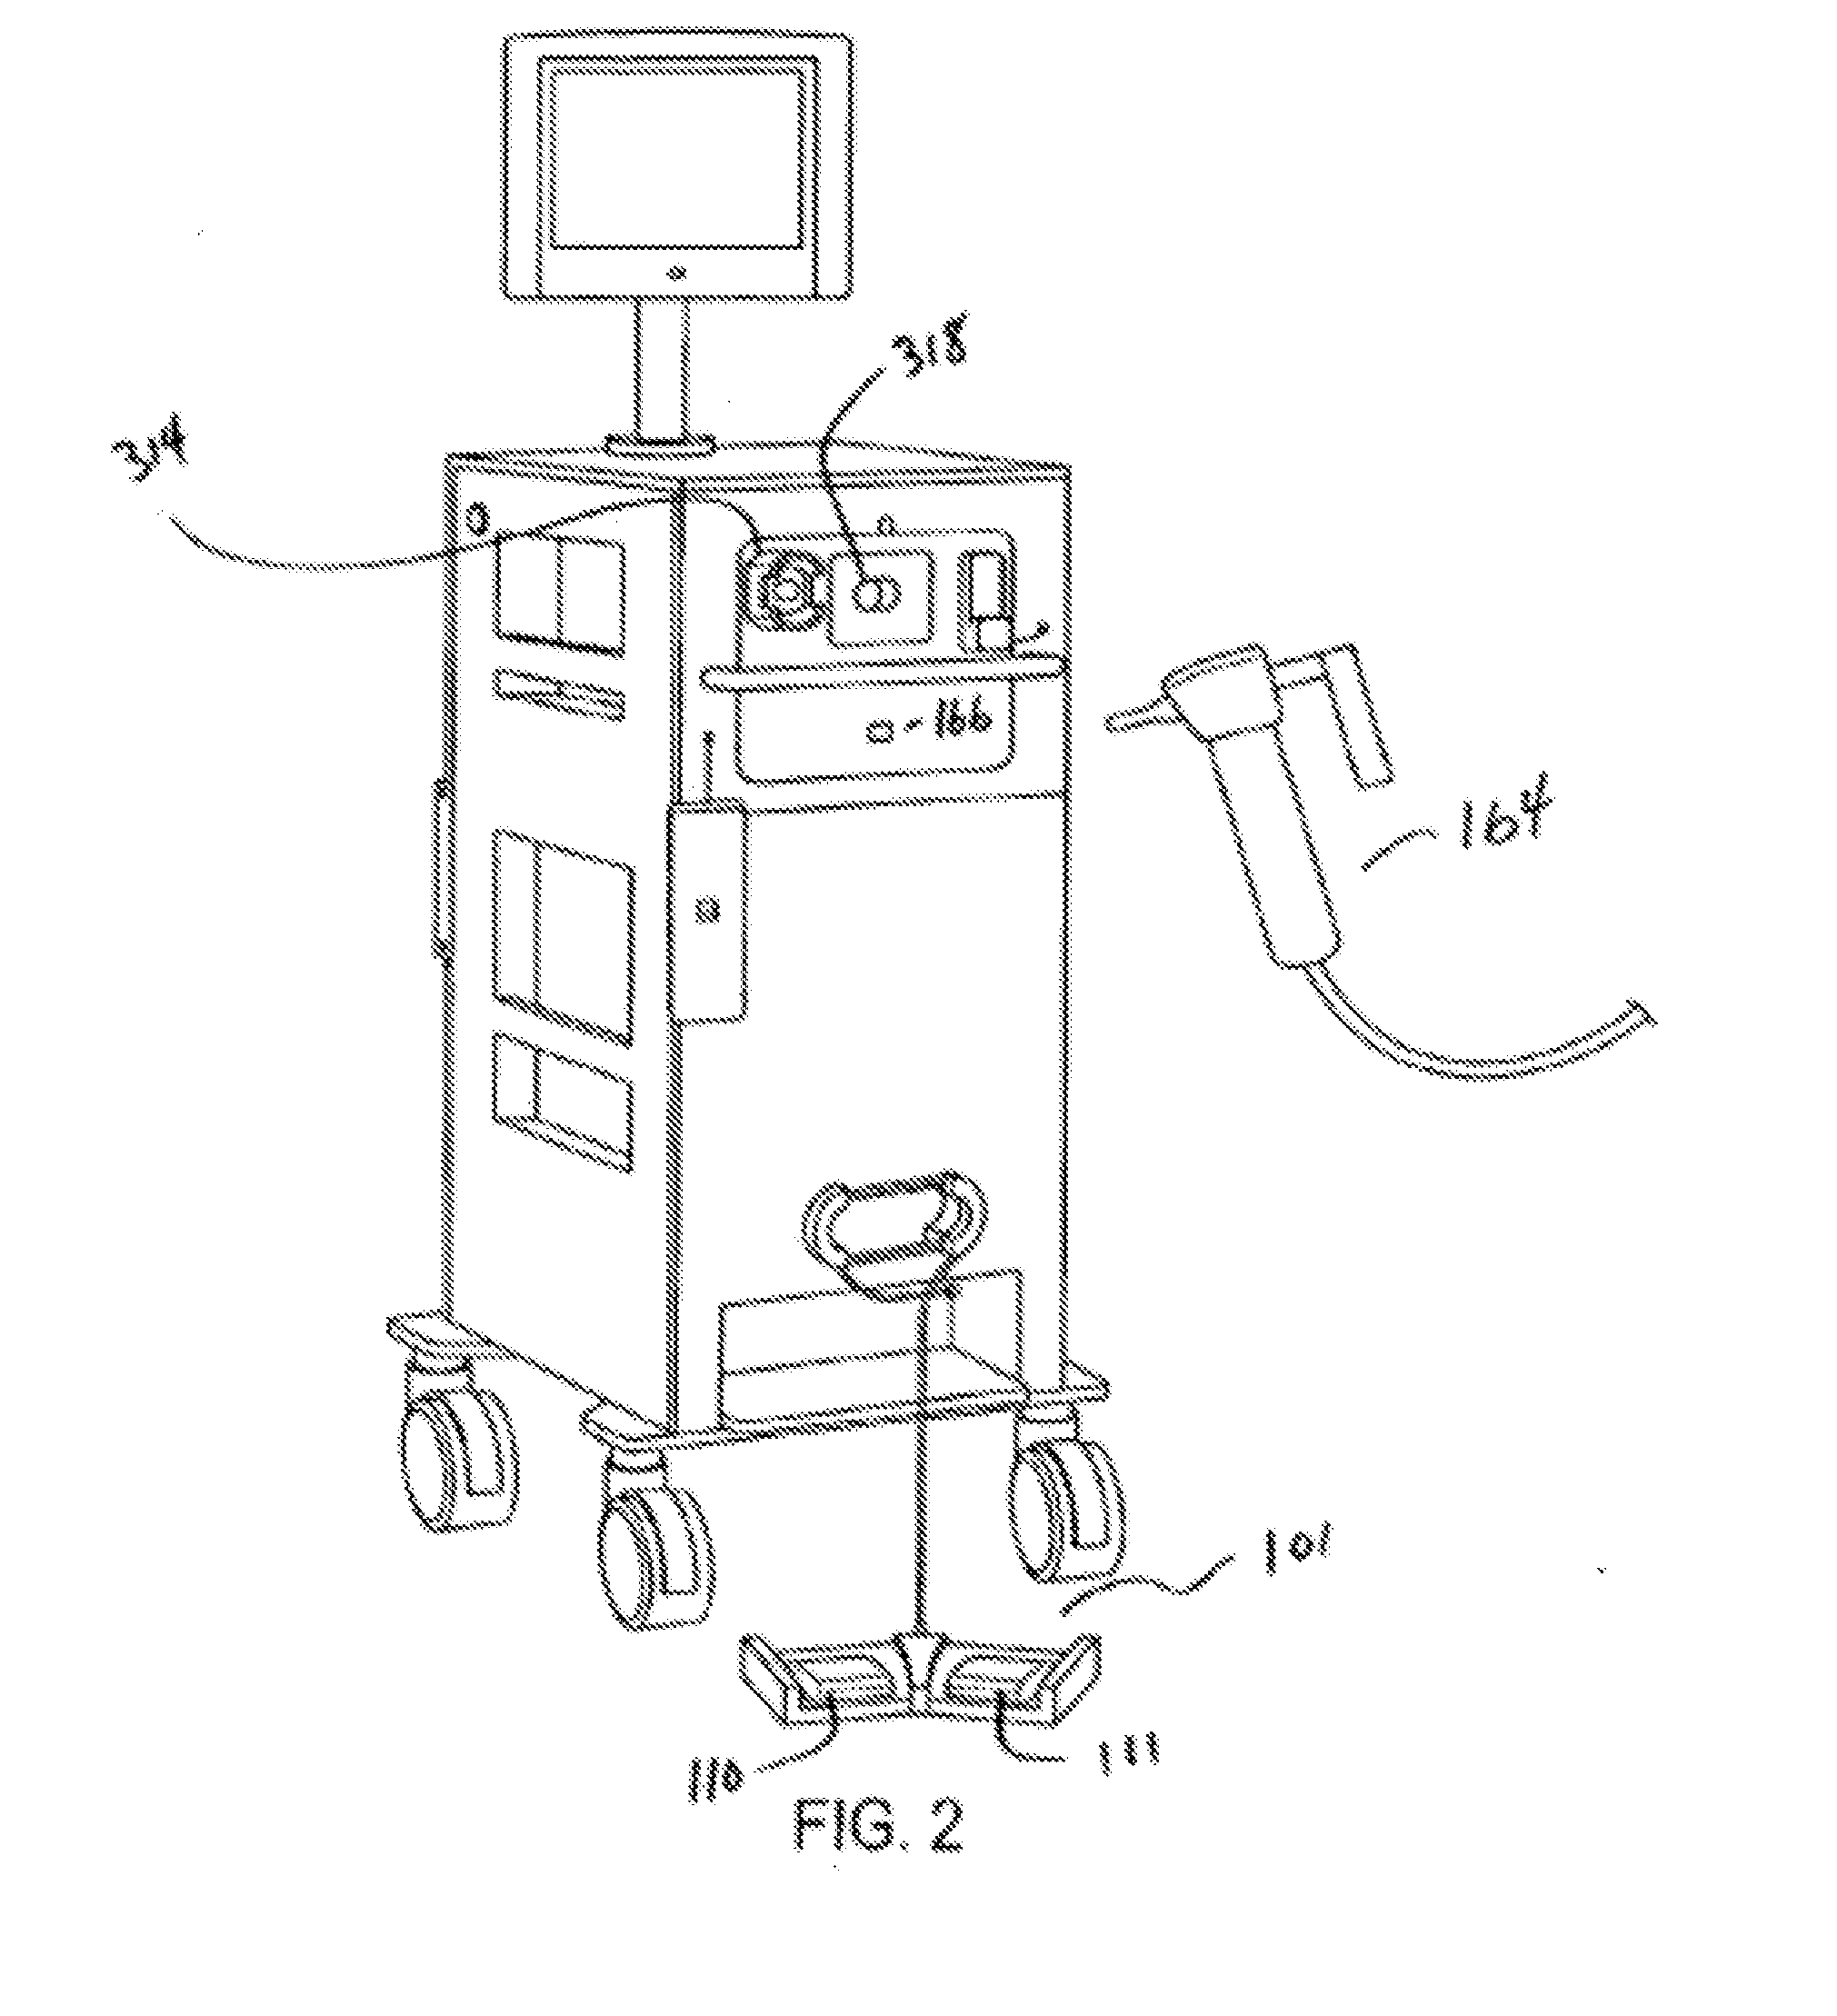 Method and system for consistent, repeatable, and safe cryospray treatment of airway tissue